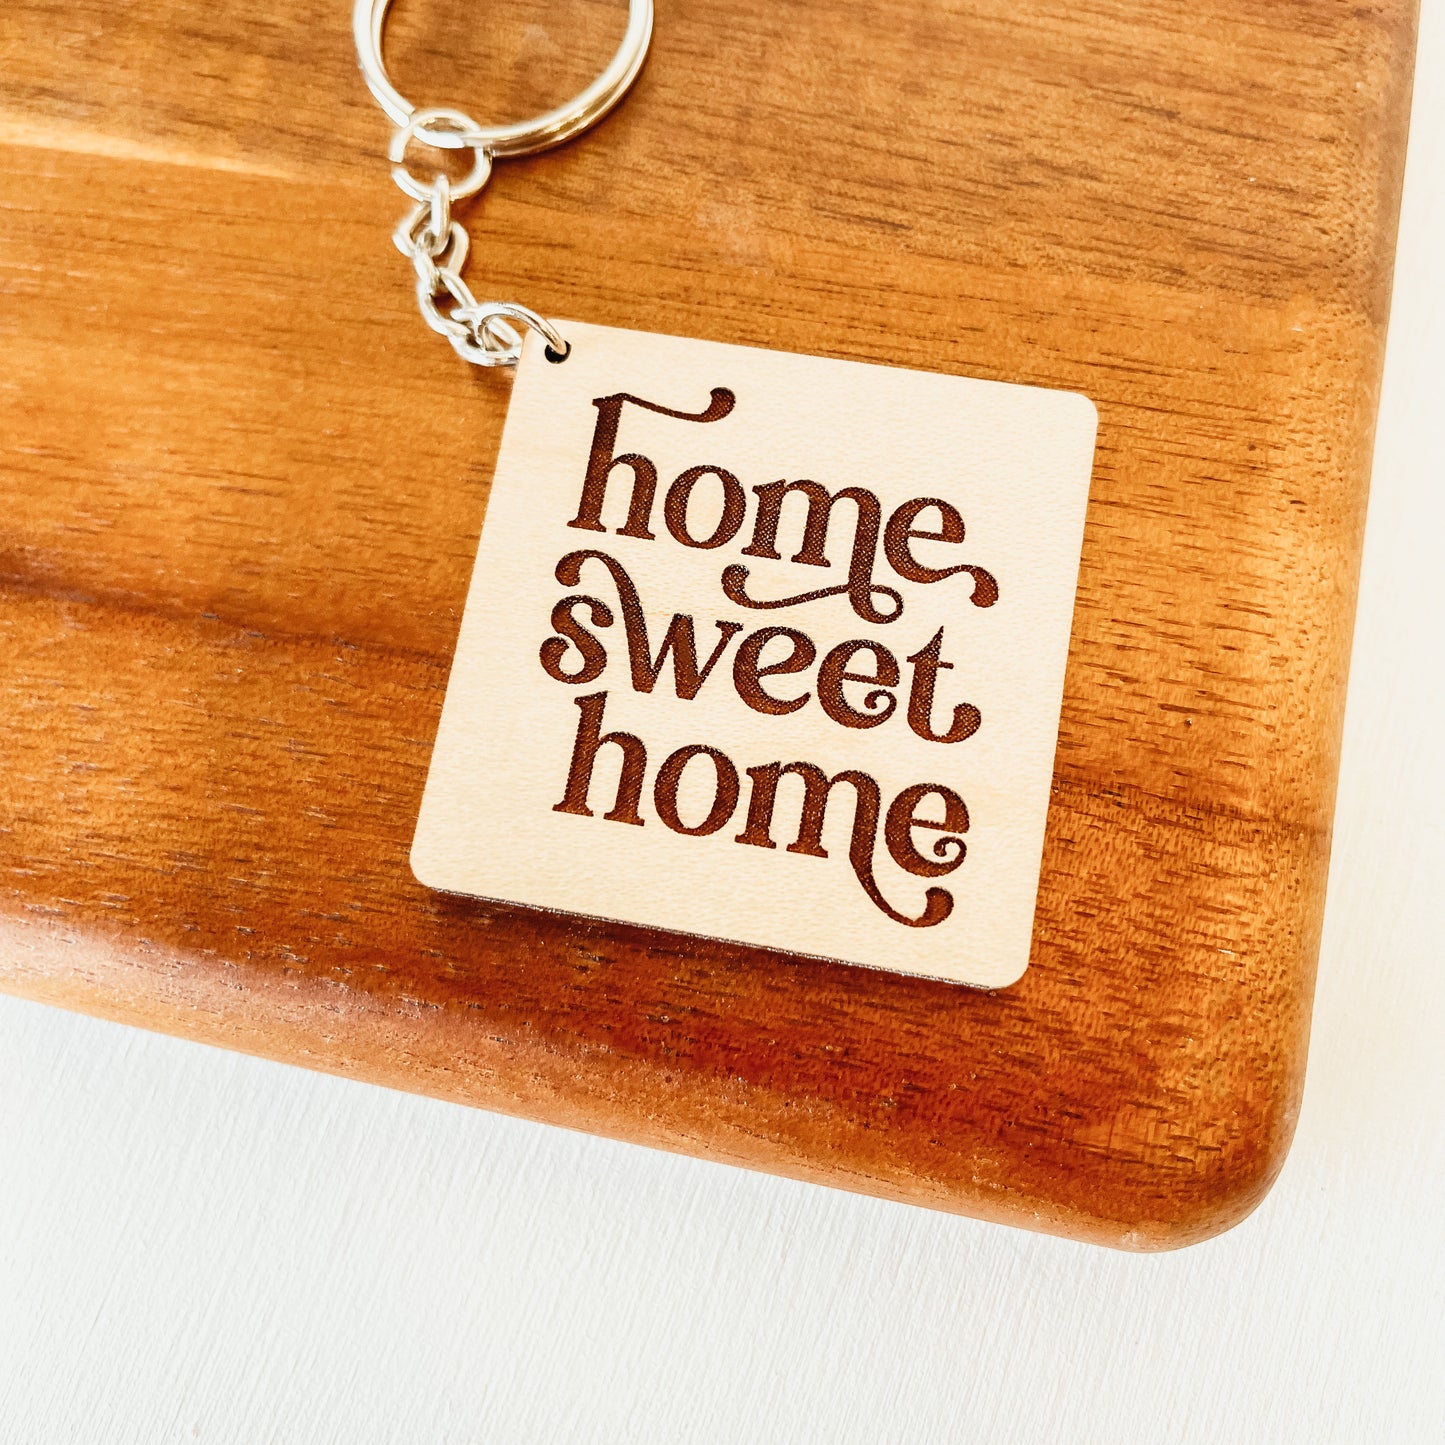 Home Sweet Home Square Keychain